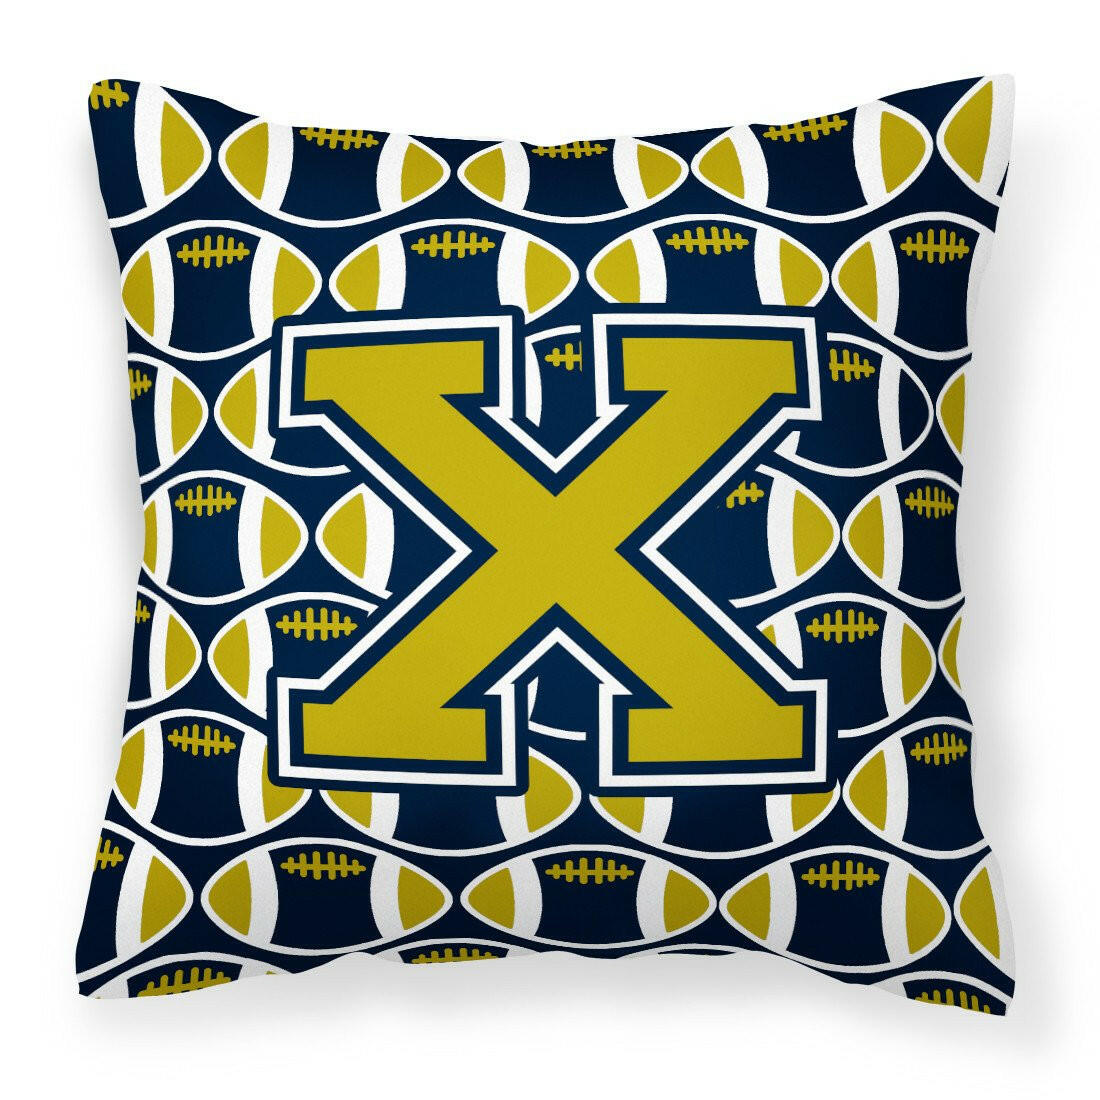 Letter X Football Blue and Gold Fabric Decorative Pillow CJ1074-XPW1414 by Caroline's Treasures